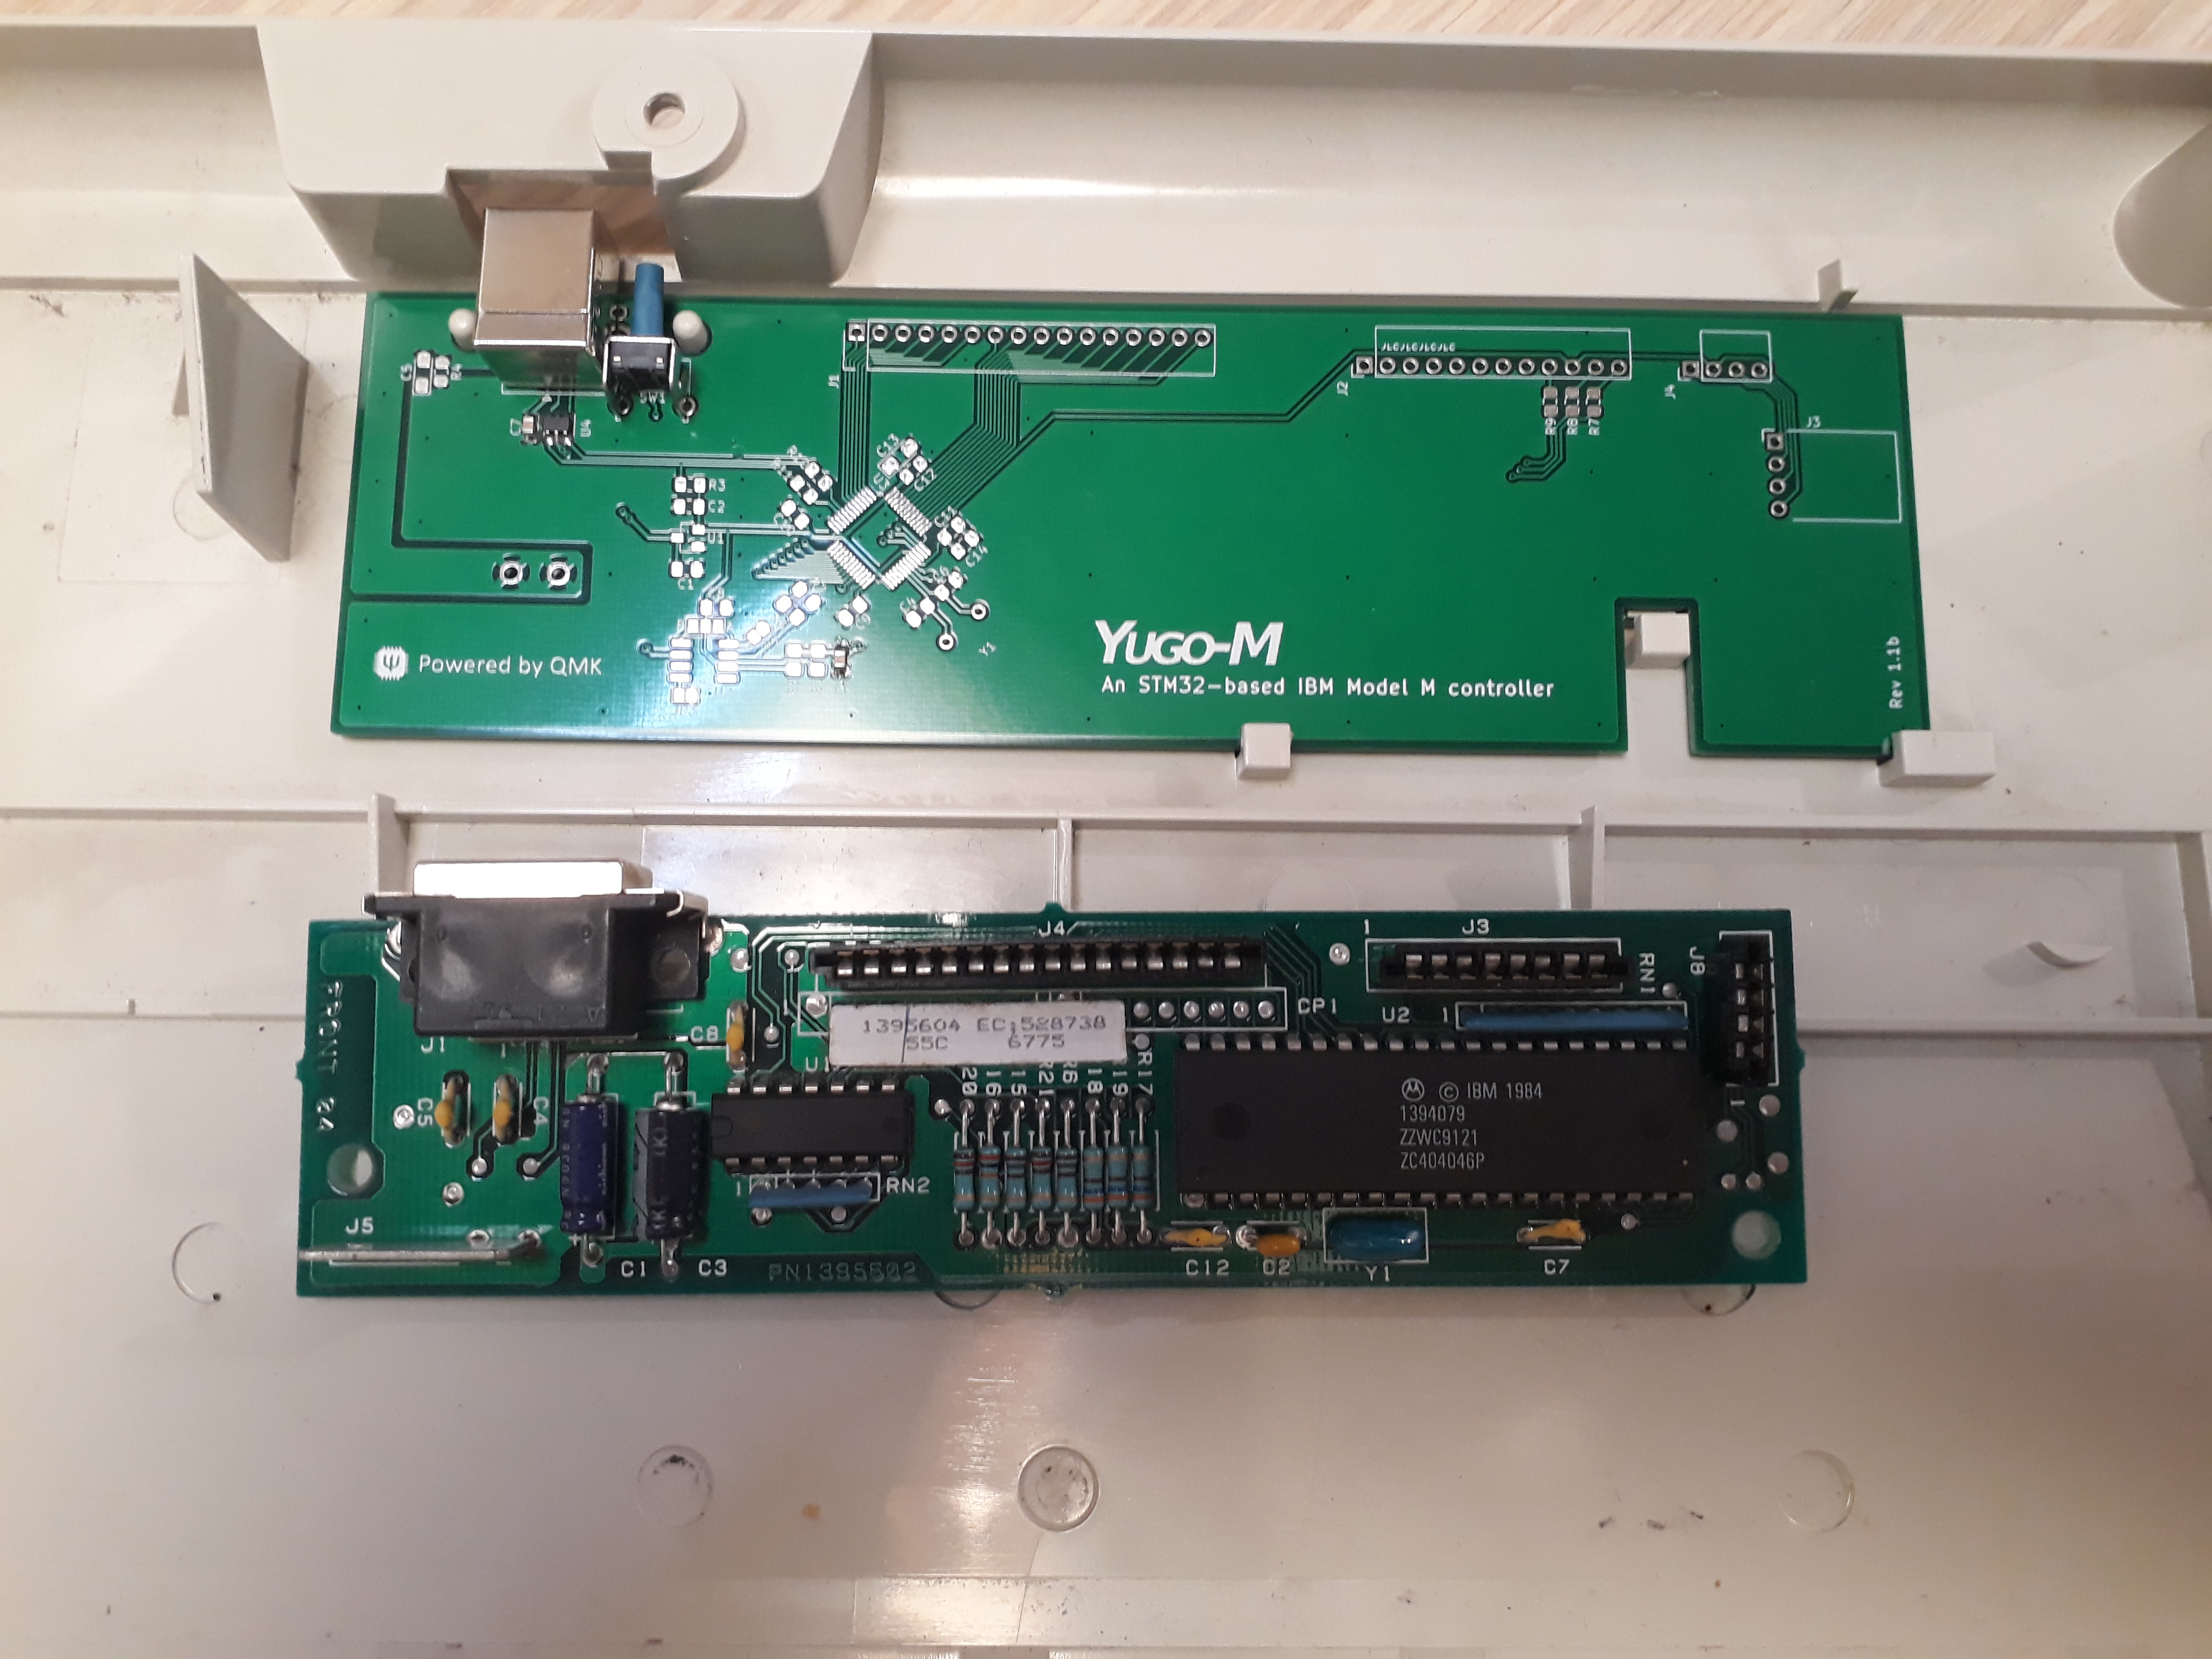 Compared to the original PCB which is a smaller variant.